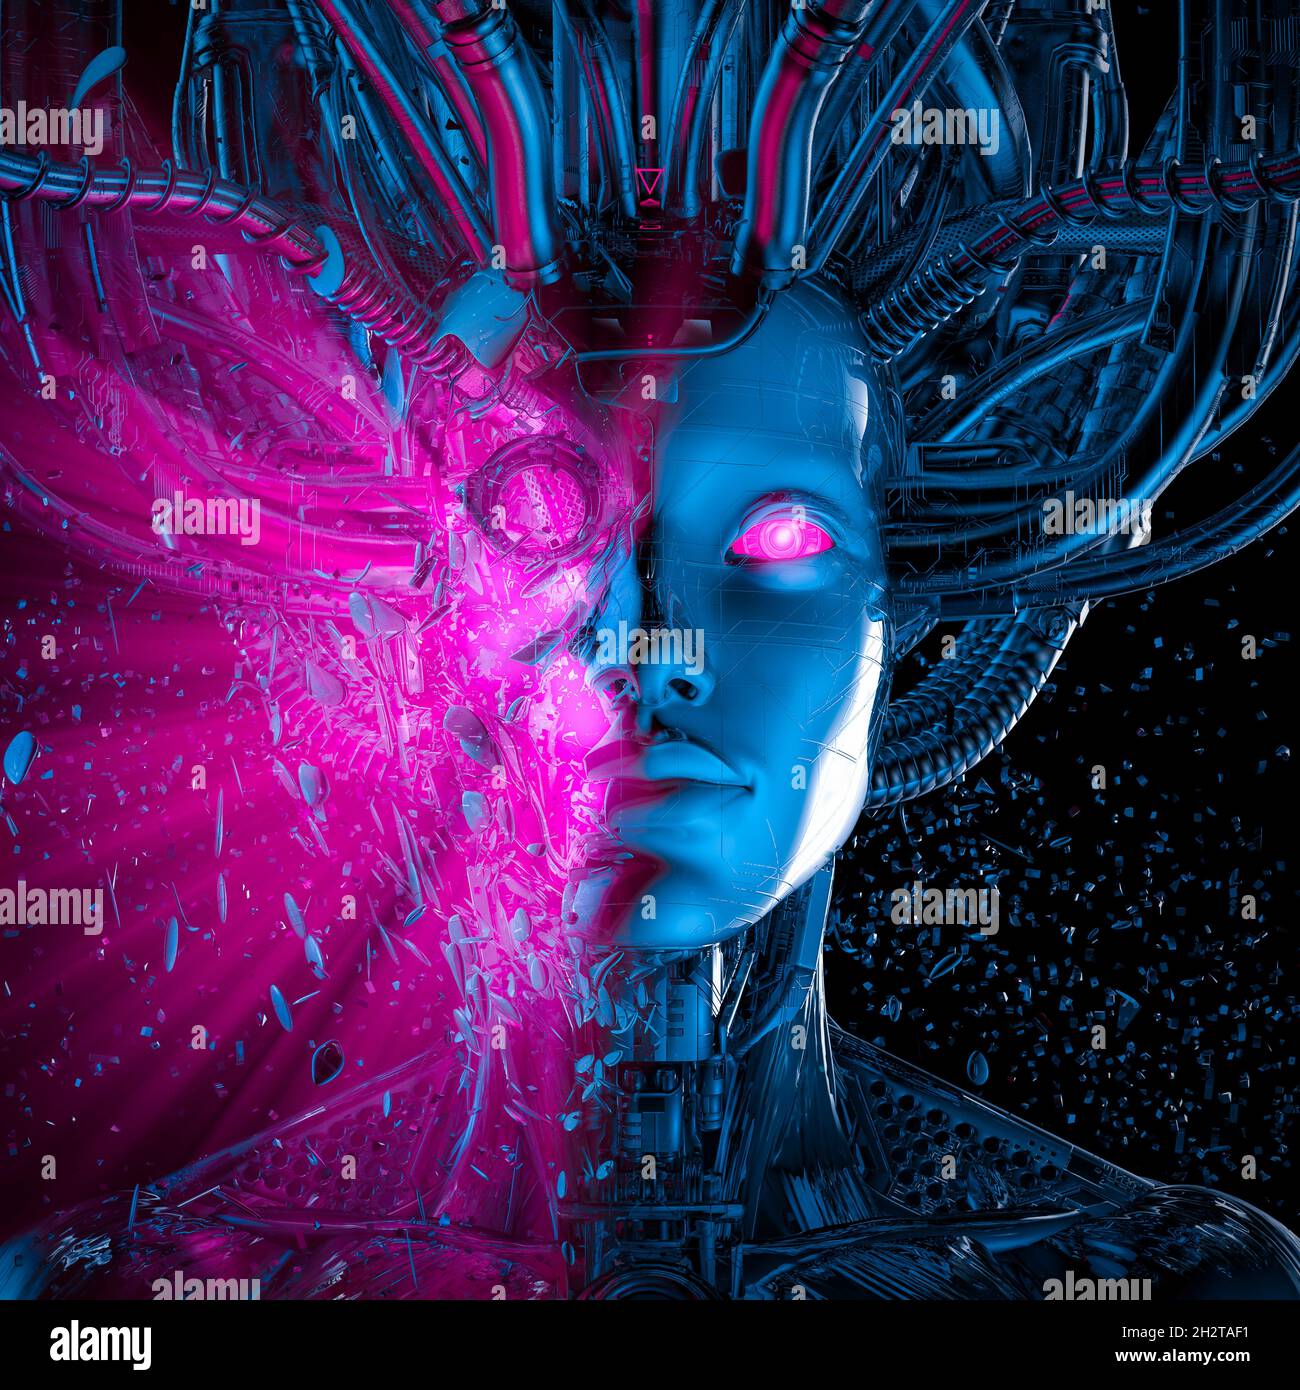 Shattered dream of the machine - 3D illustration of metallic science fiction female artificial intelligence head exploding Stock Photo